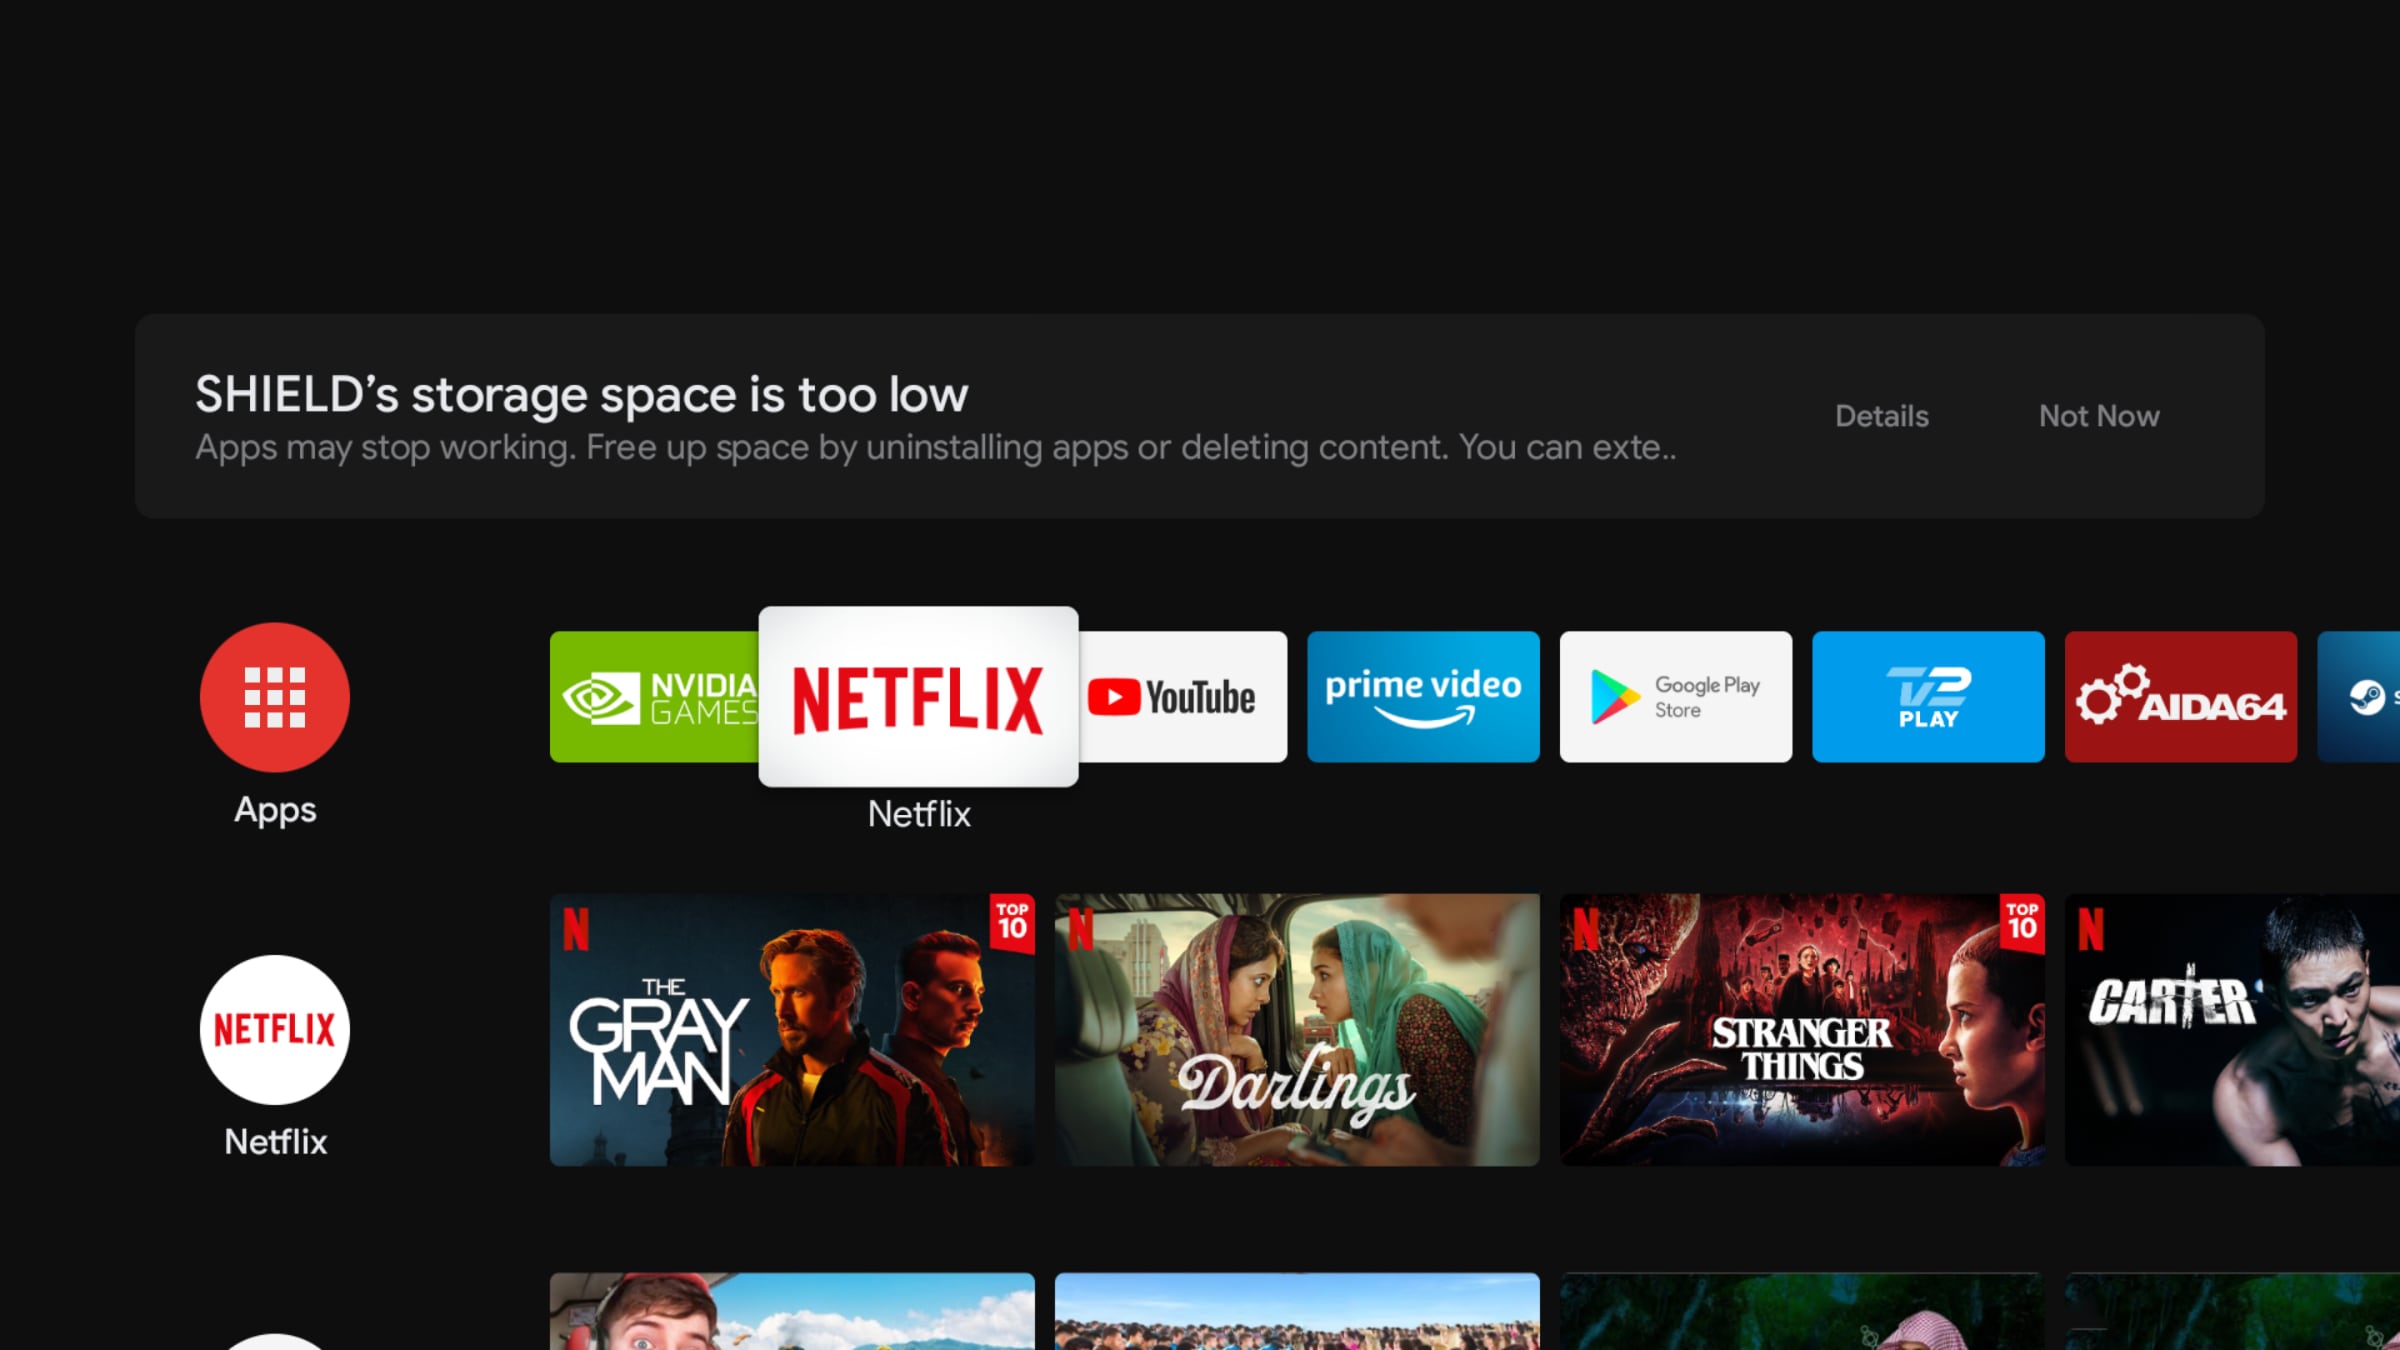 TCL Android TV - Apps 